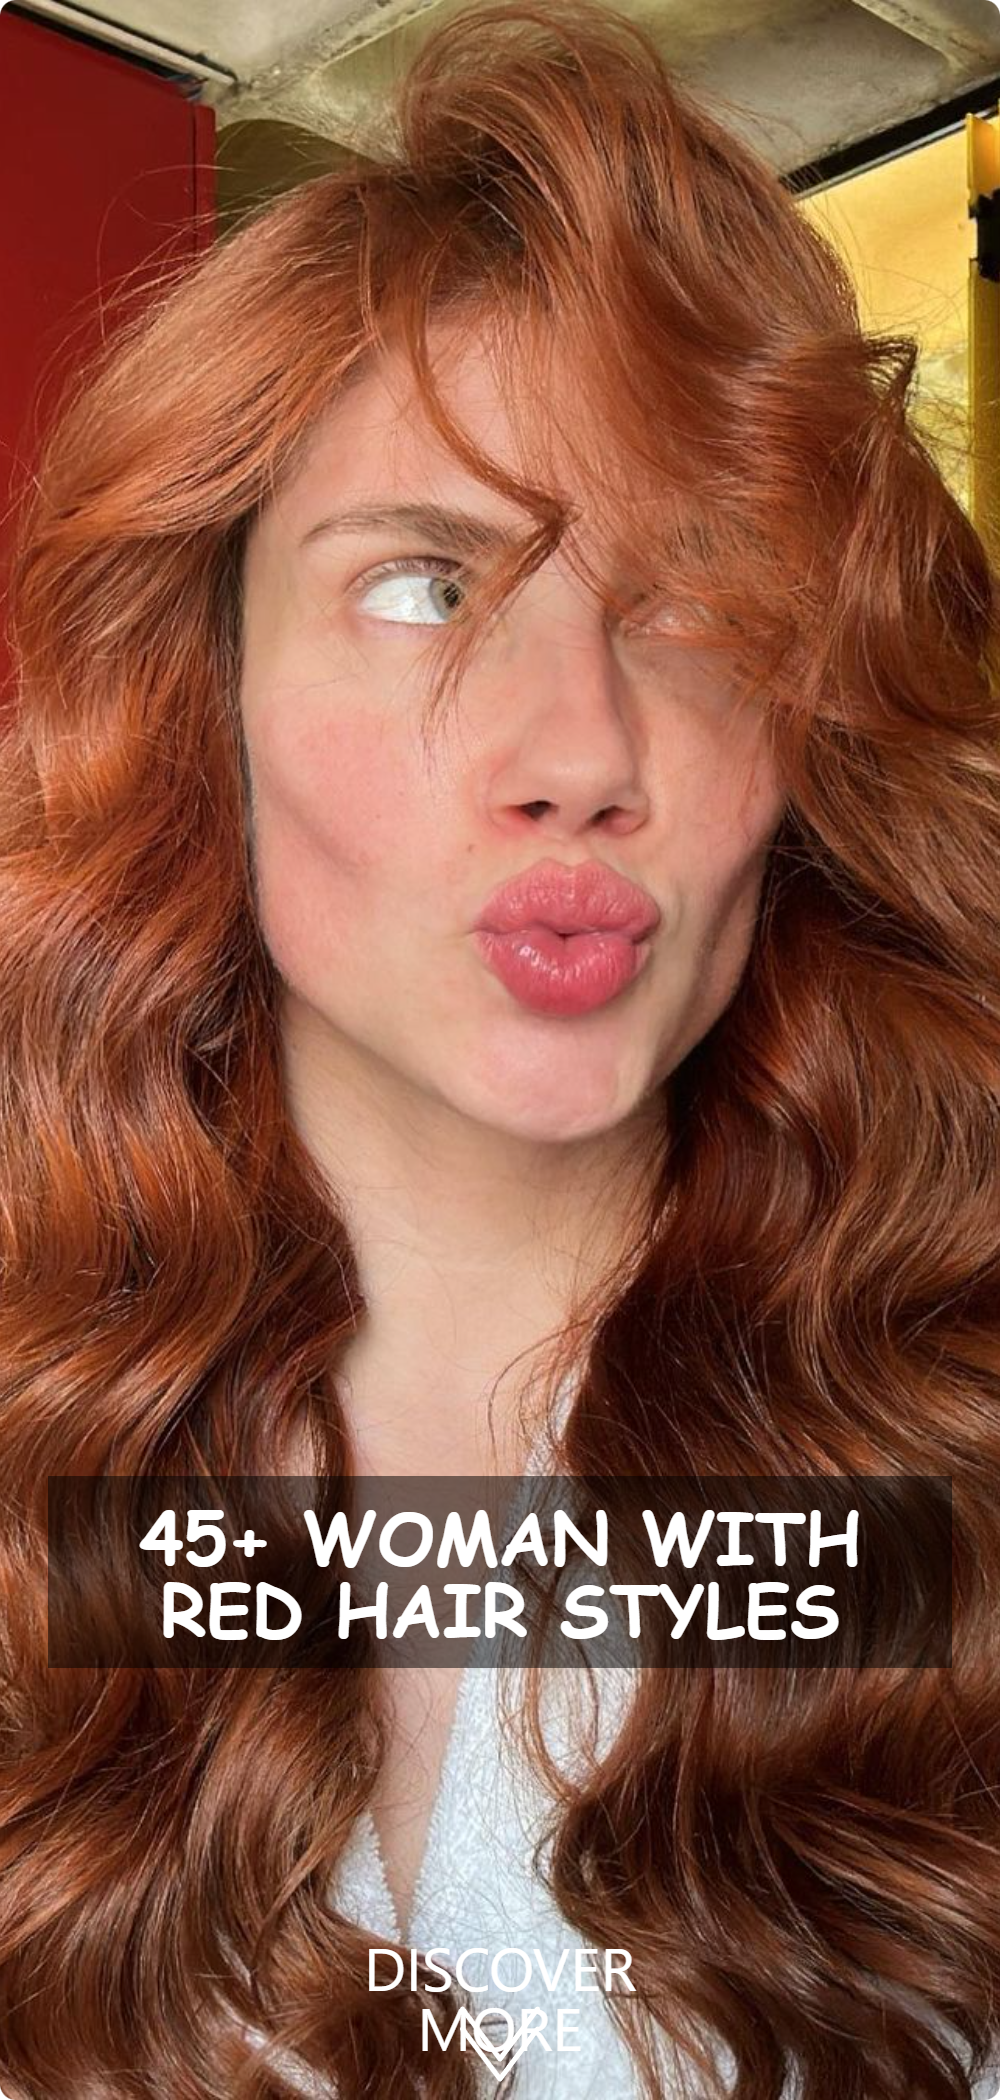 A woman with luscious red hair puckering for a playful selfie